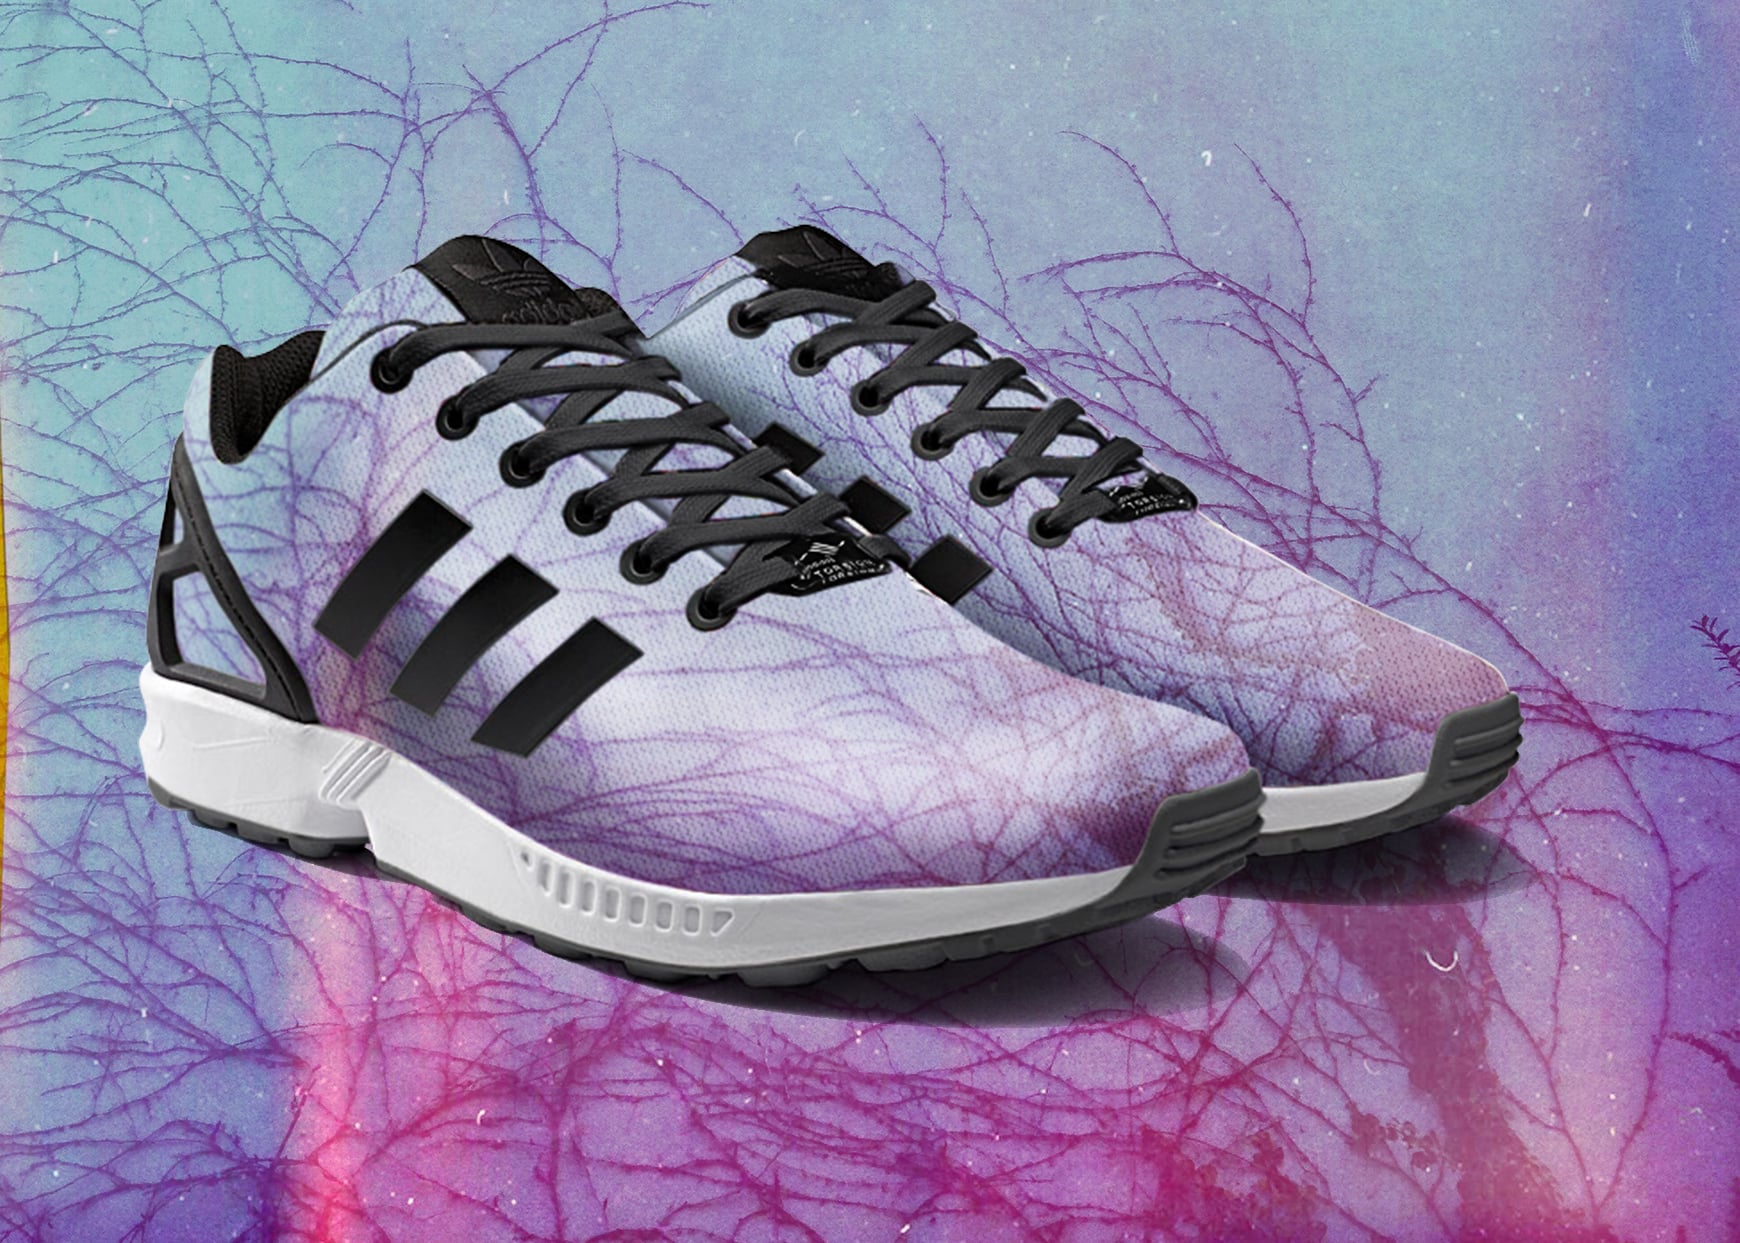 hatch Rank None Custom Adidas Shoes With Instagram Pictures | POPSUGAR Tech